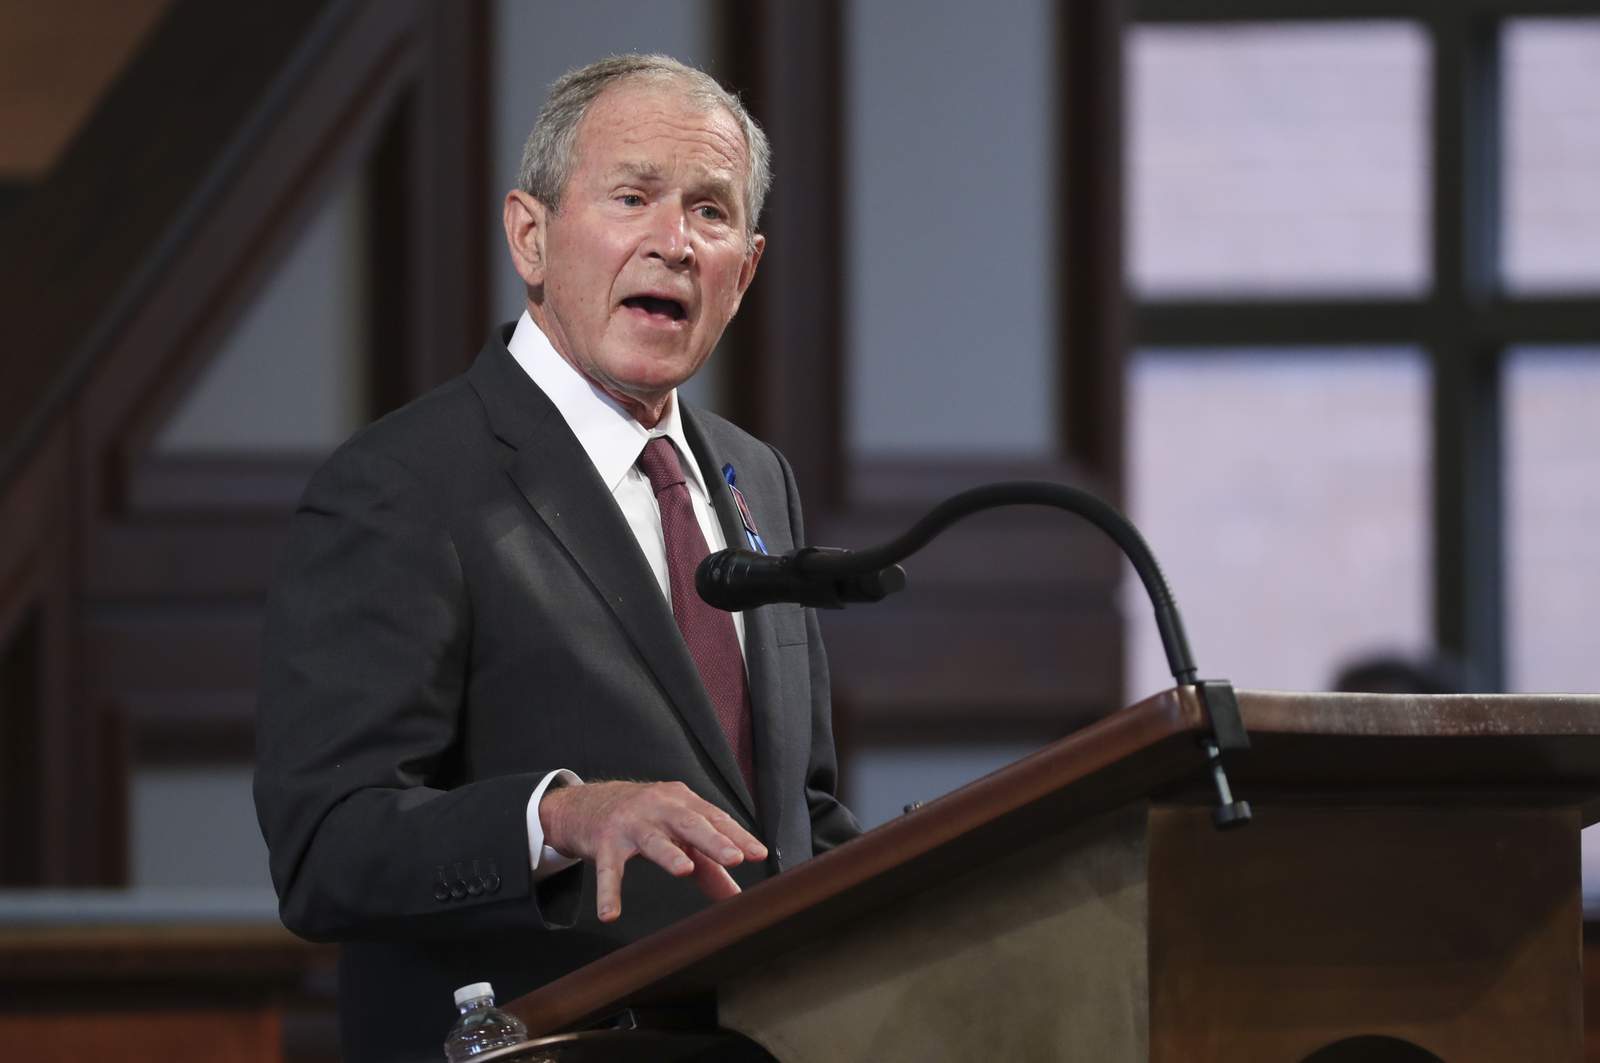 ‘Sickening and heartbreaking sight’: Former President George W. Bush speaks about US Capitol storming